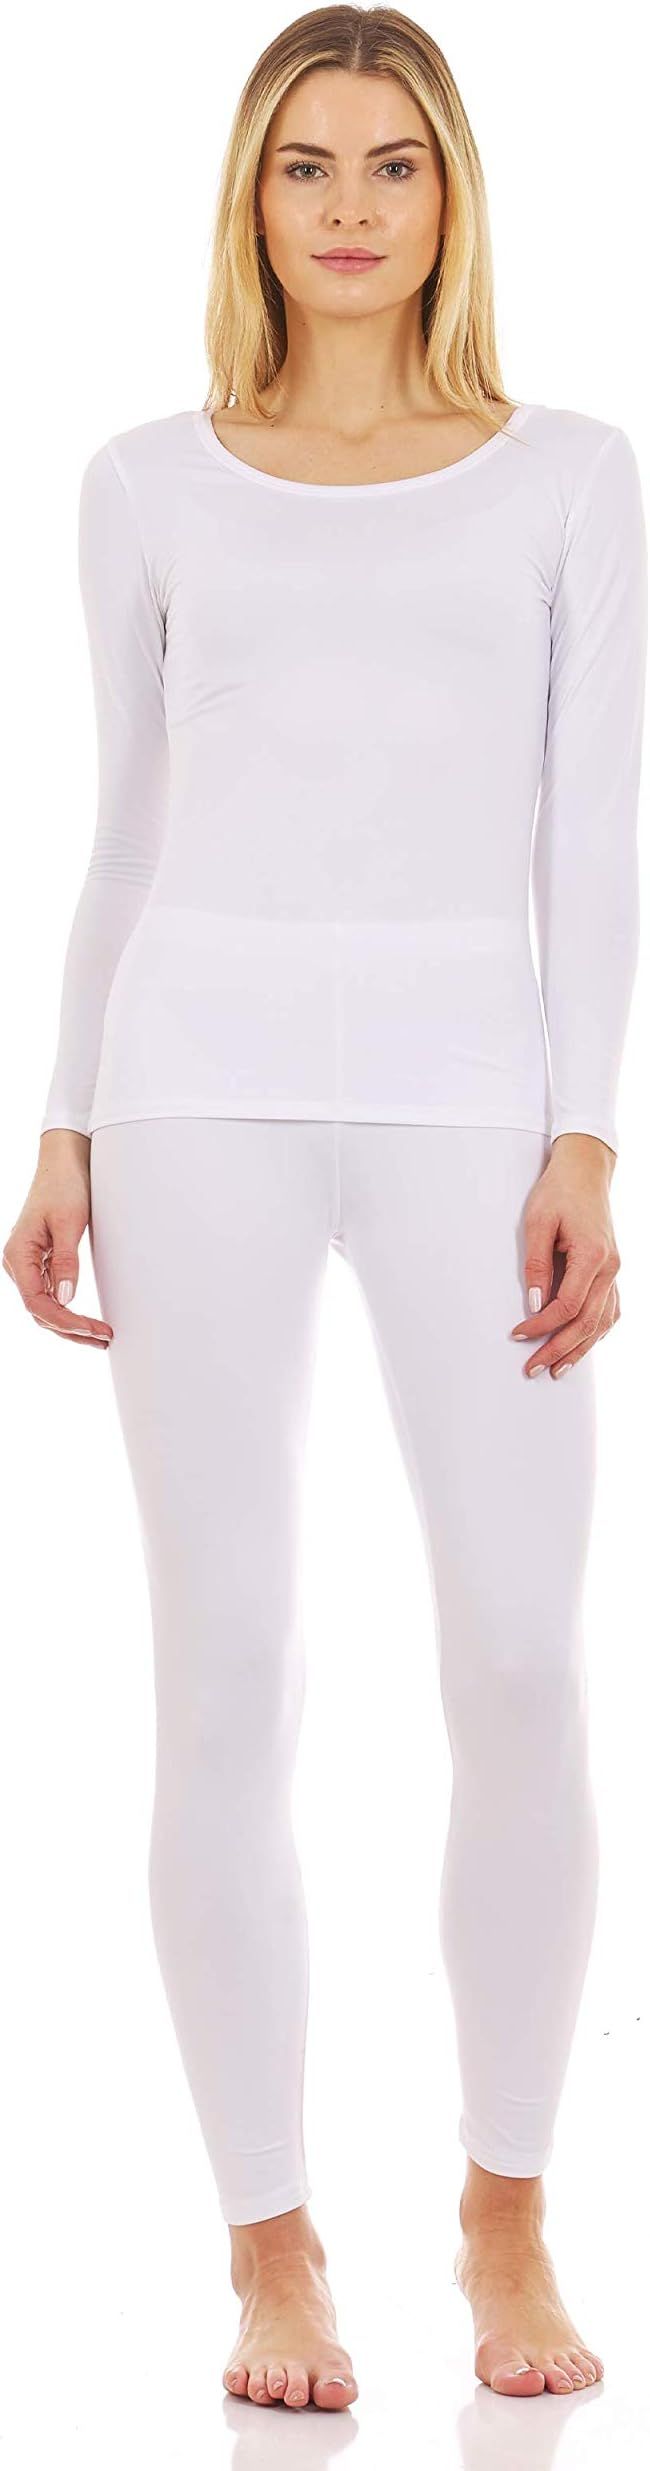 Thermajane Long Johns Thermal Underwear for Women Scoop Neck and V- Neck | Amazon (US)